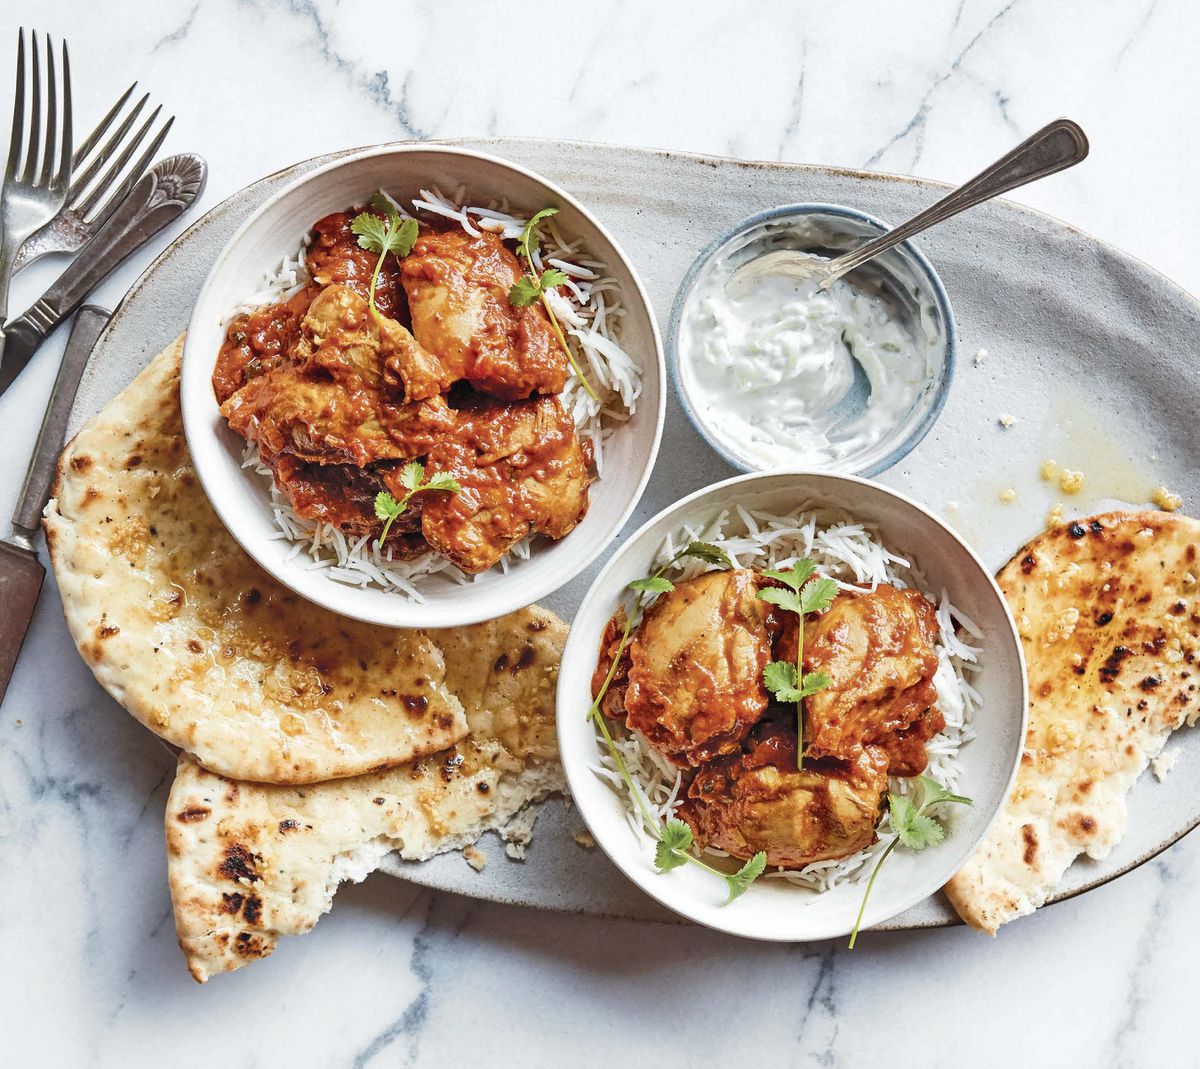 Archana Mundhe's Instant Pot Butter Chicken Recipe on Food52